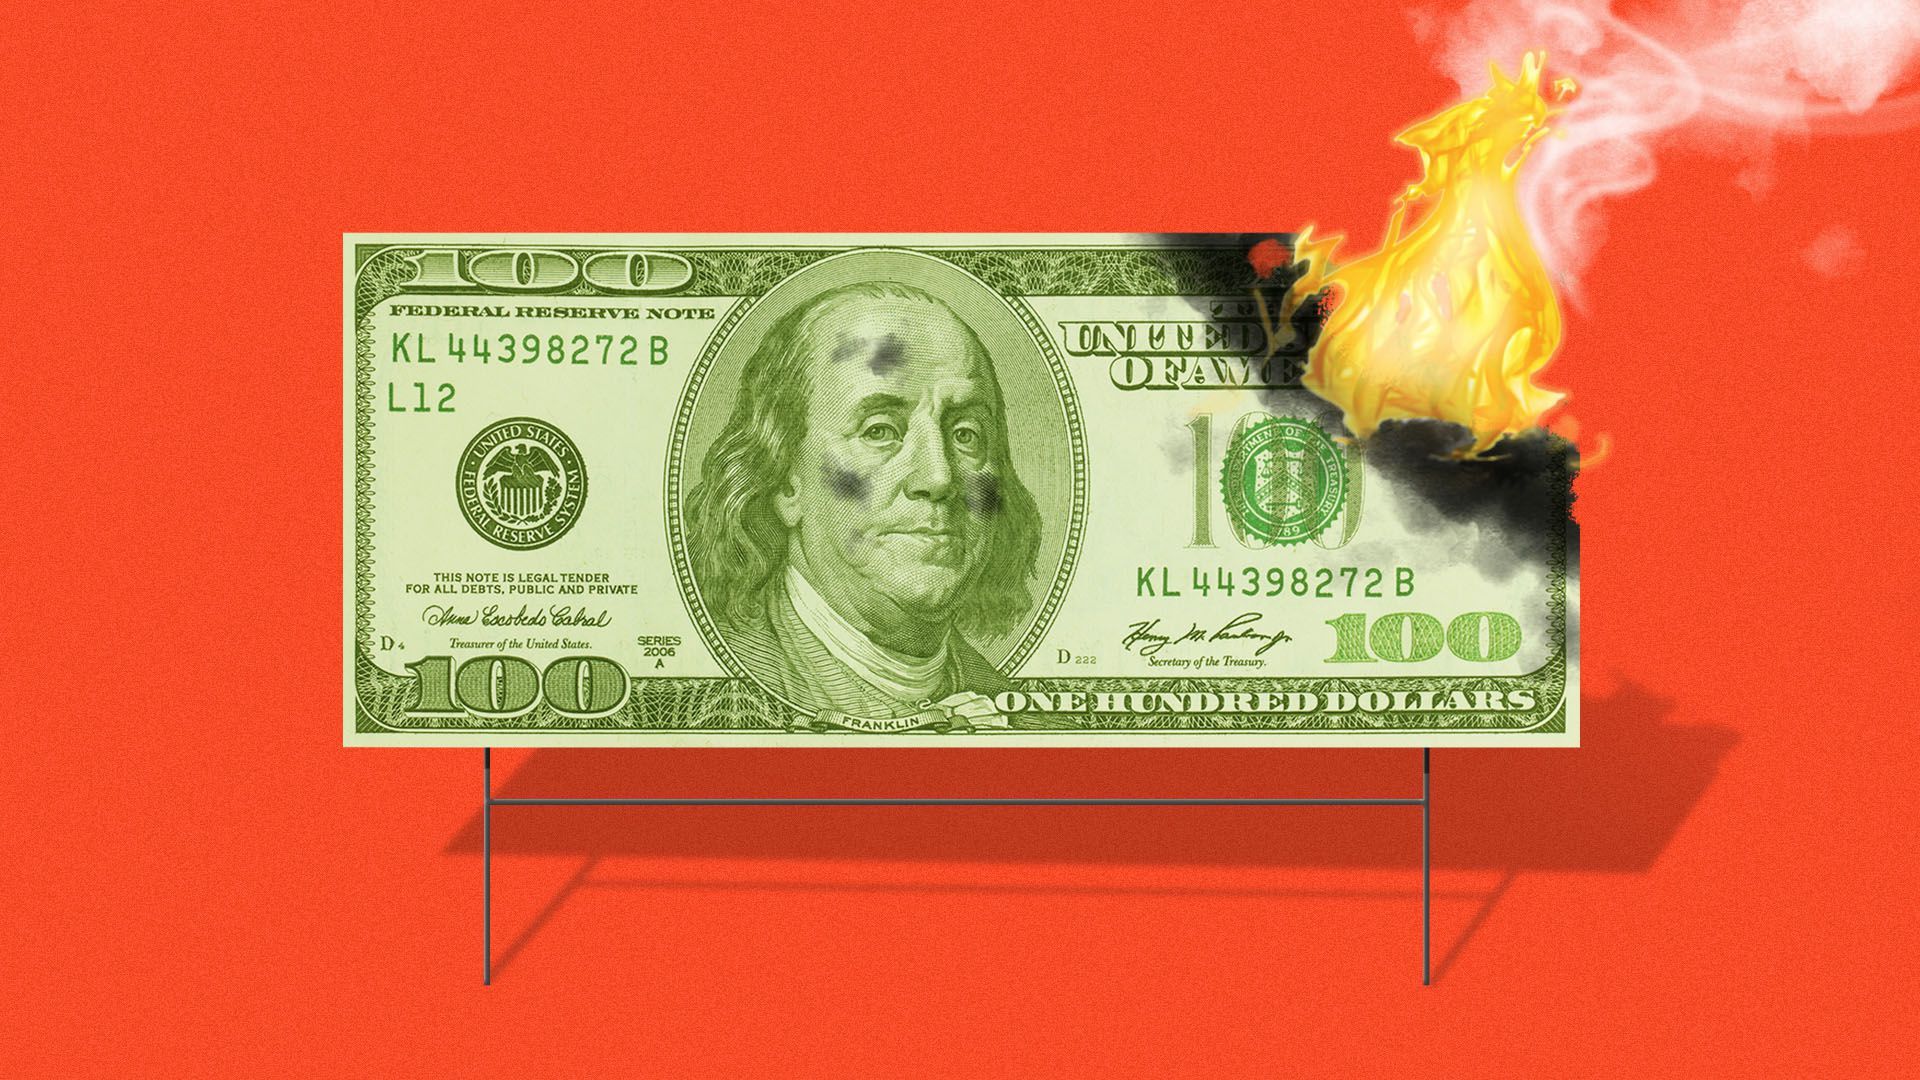 Illustration of a dollar bill as a lawn sign on fire